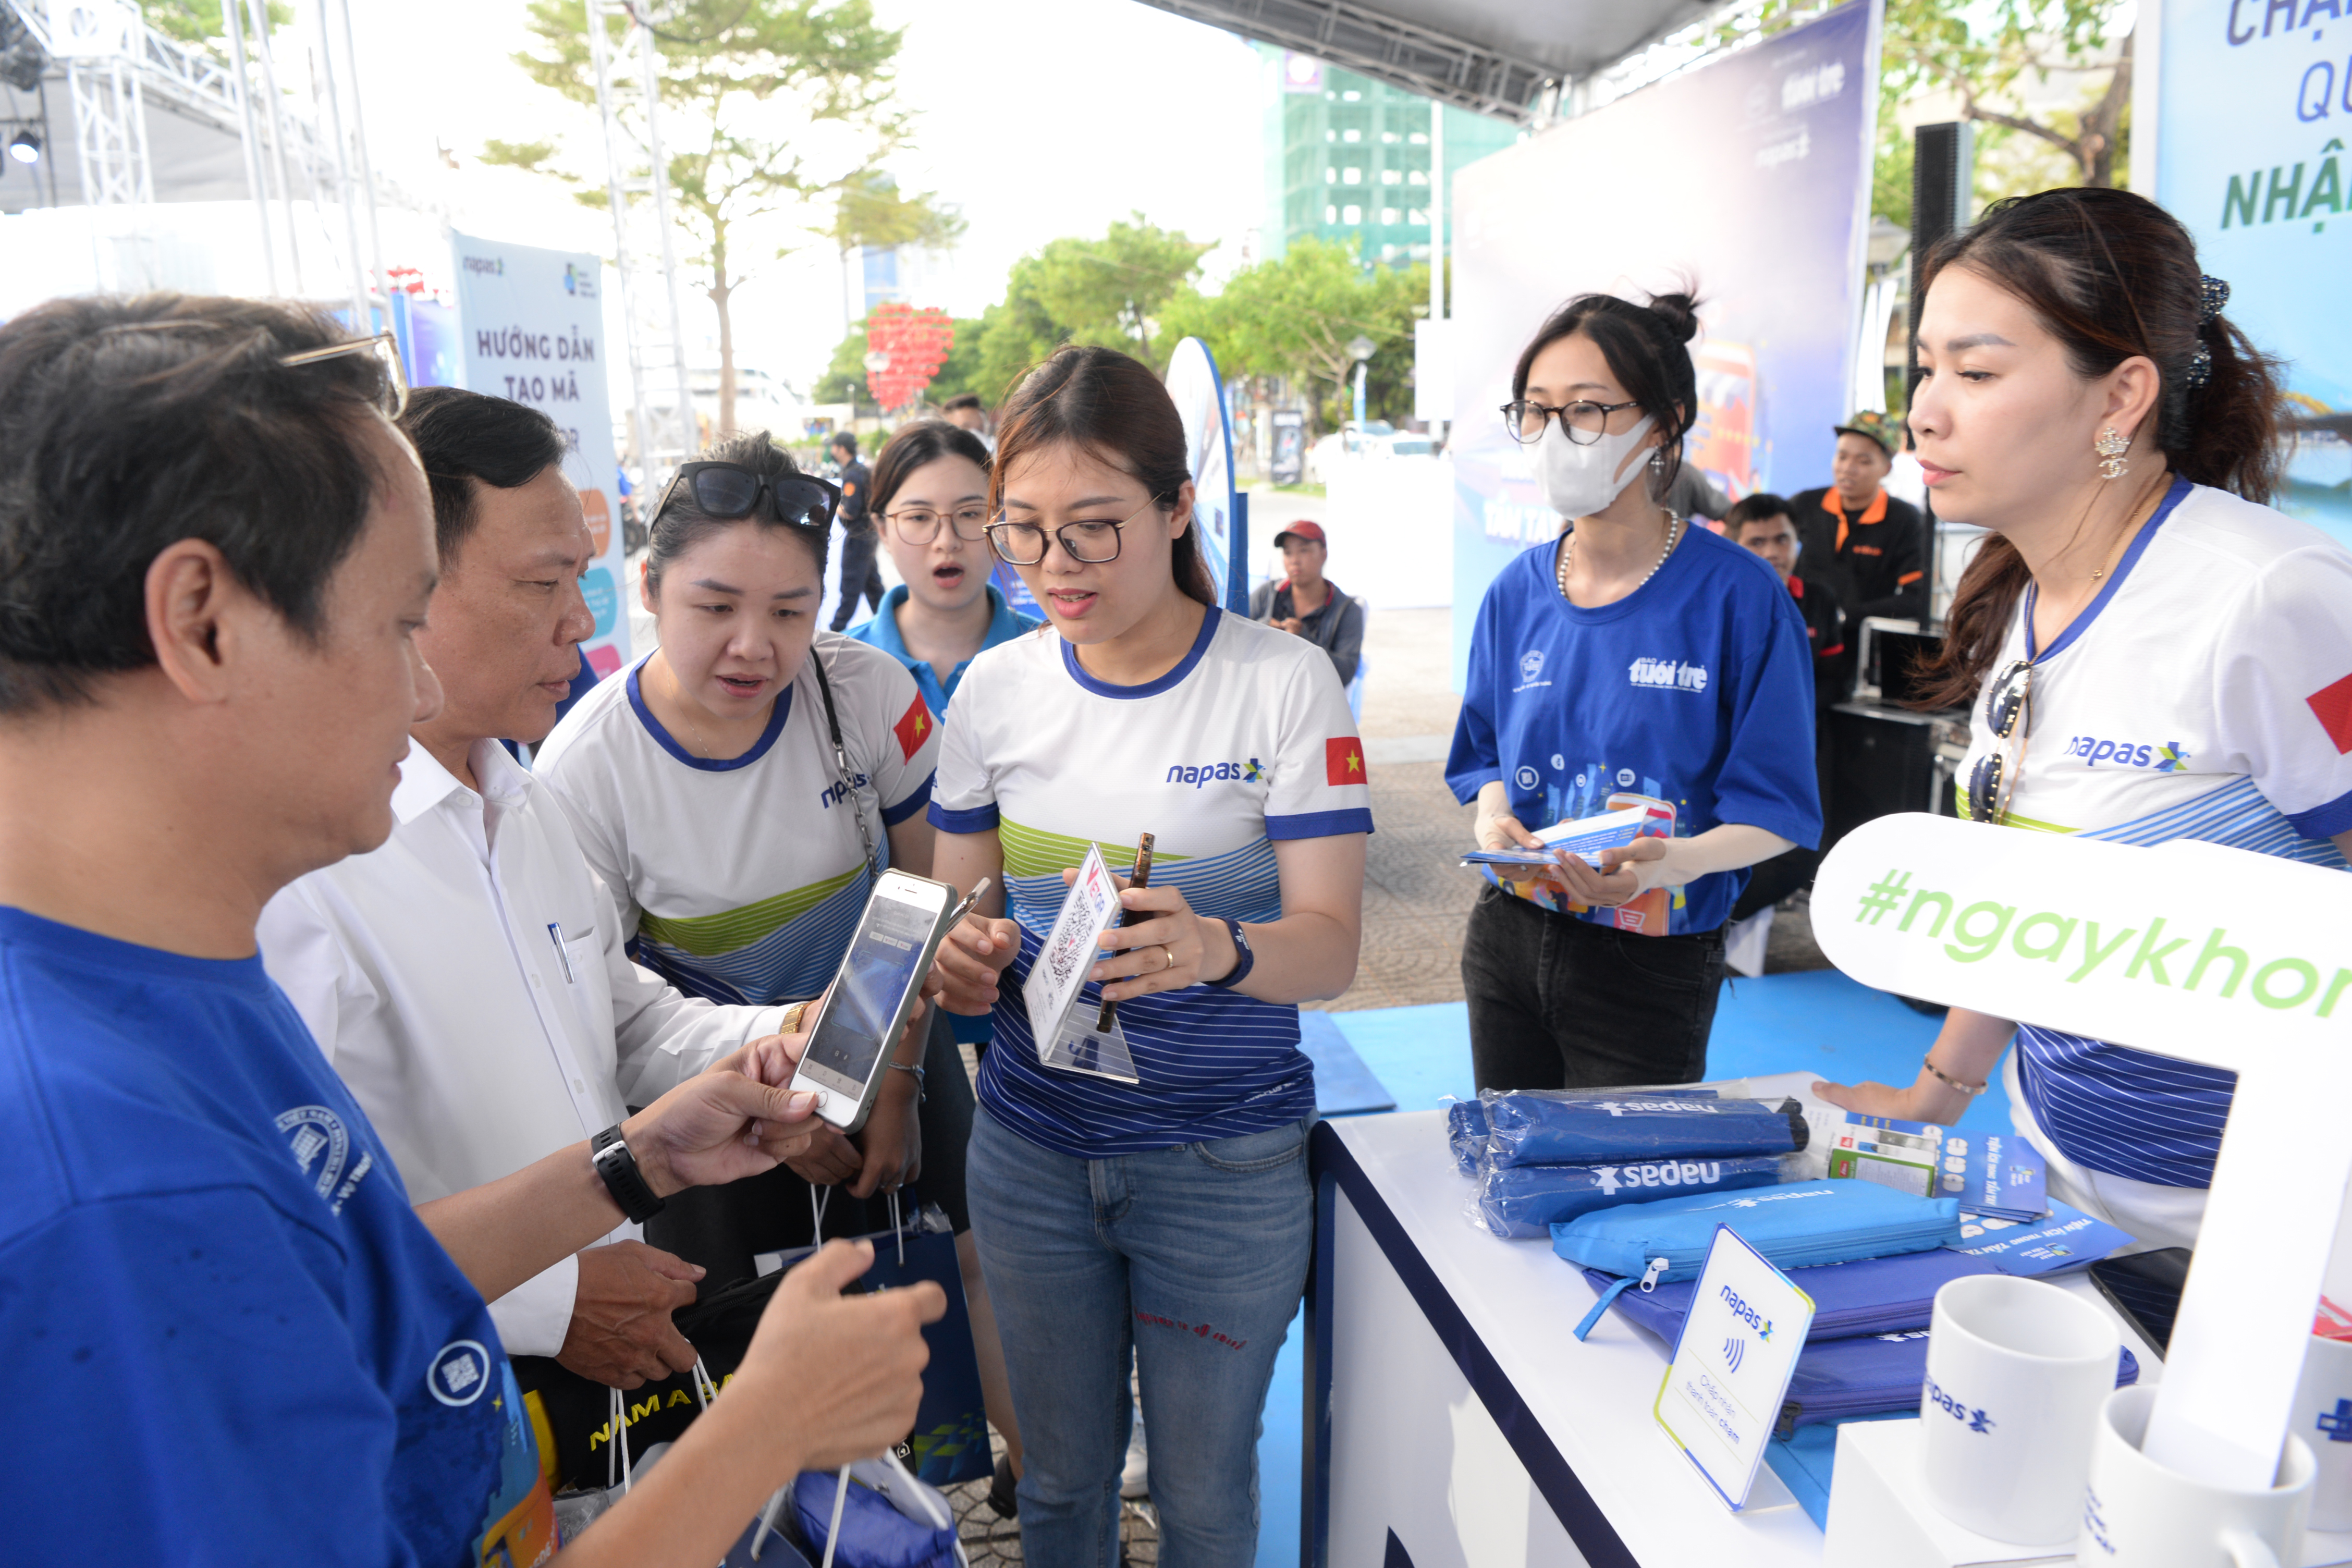 Da Nang residents try out digital payment methods at cashless fair